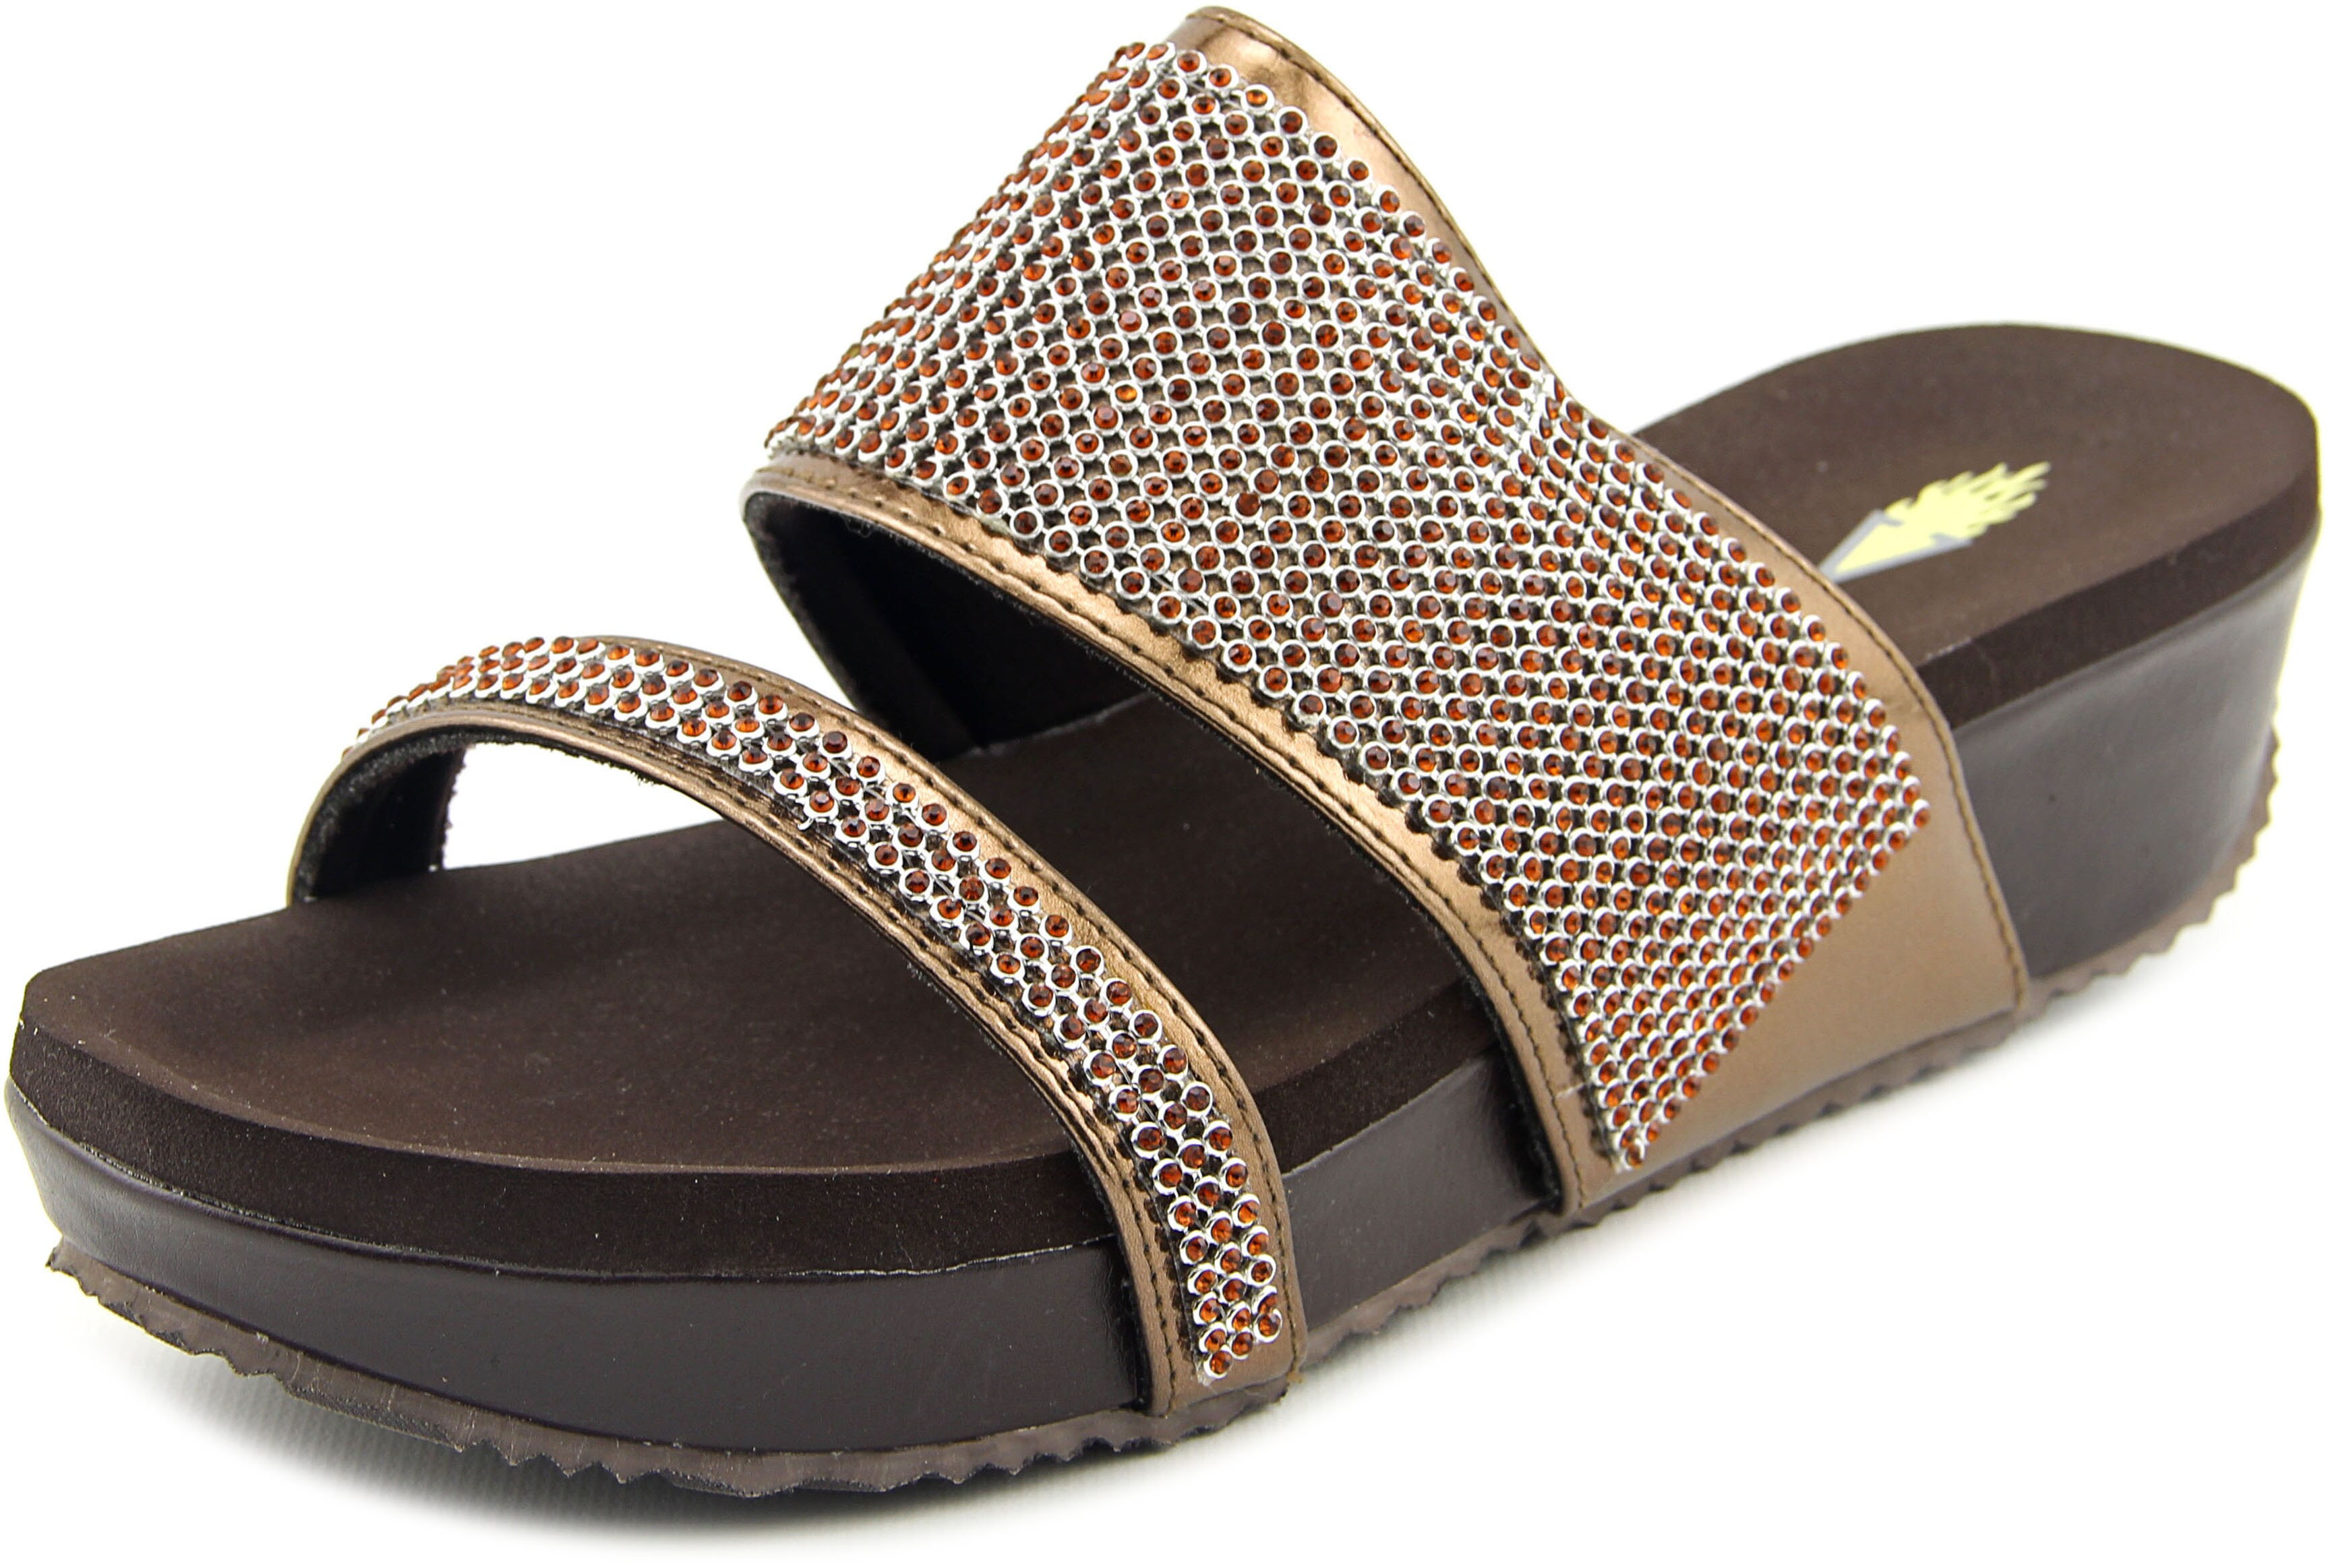 Volatile Pixies Wedge Sandal - Final Sale - Free Shipping | DSW